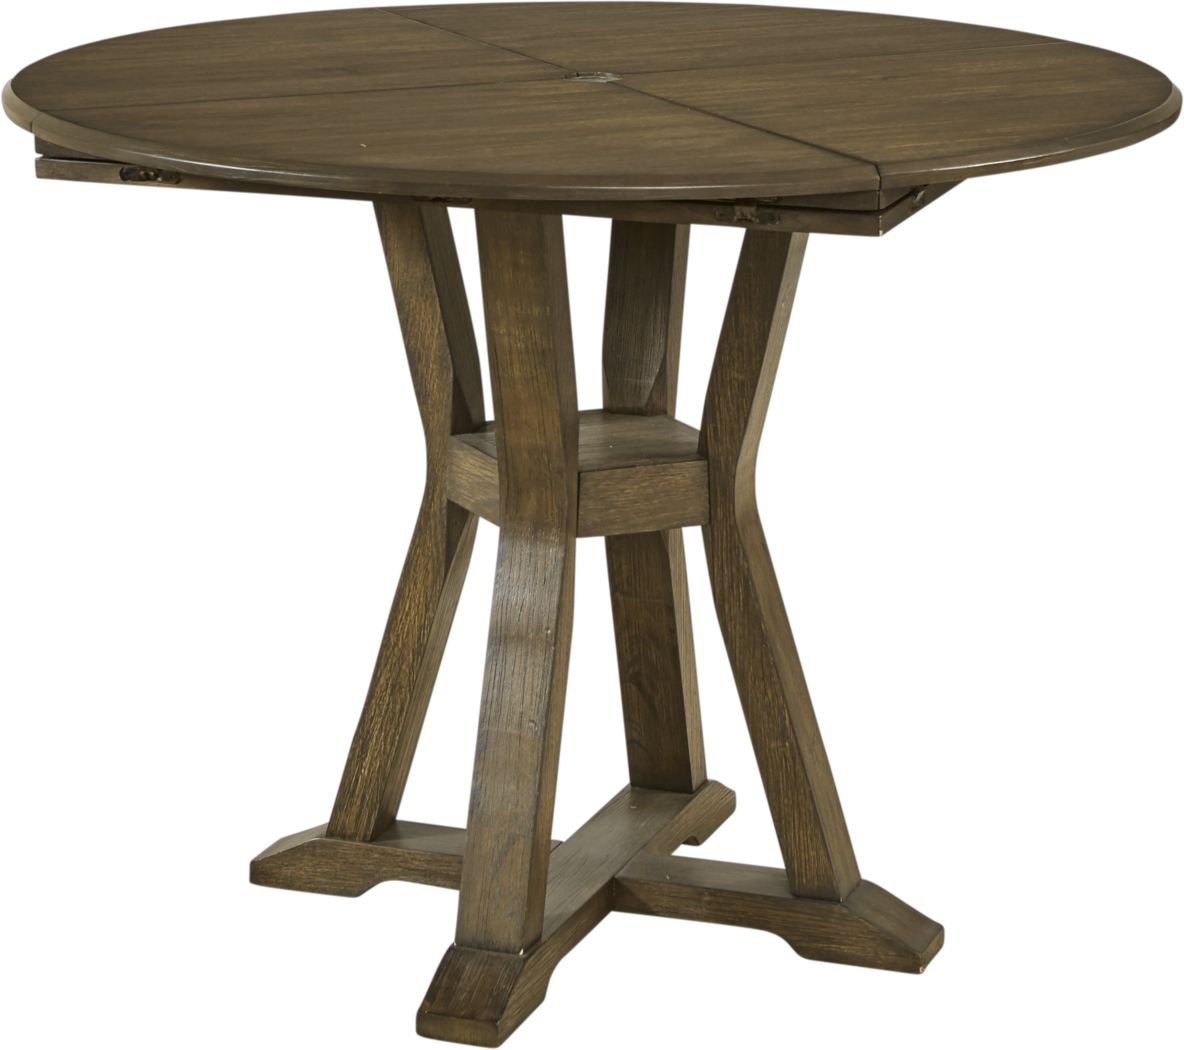 Mountain View Oak Round Counter Height Dining Table Rooms To Go